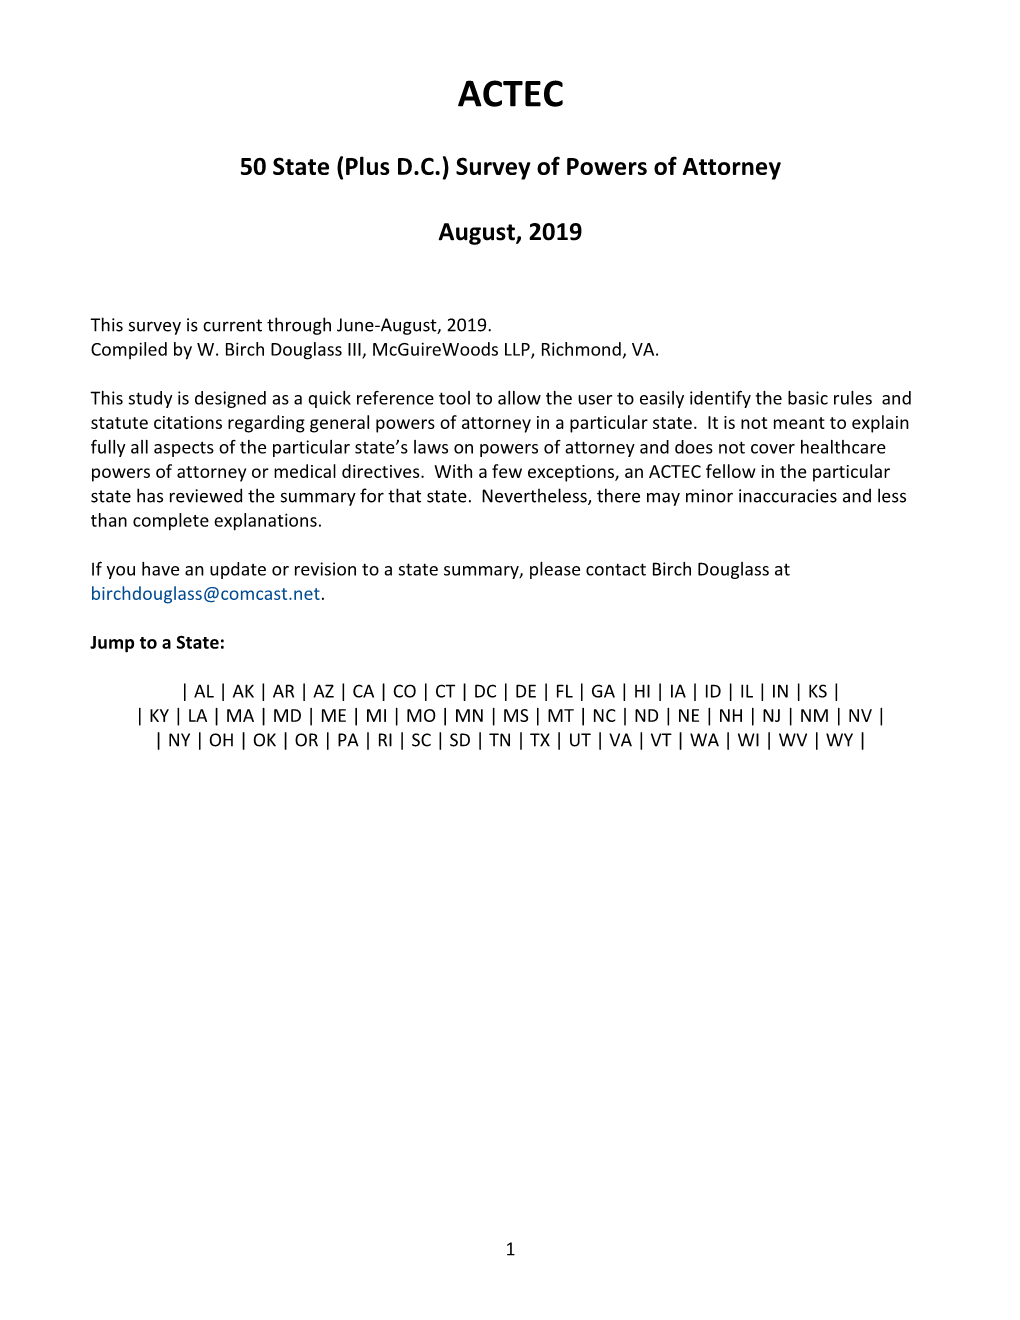 50 State (Plus DC) Survey of Powers of Attorney August, 2019